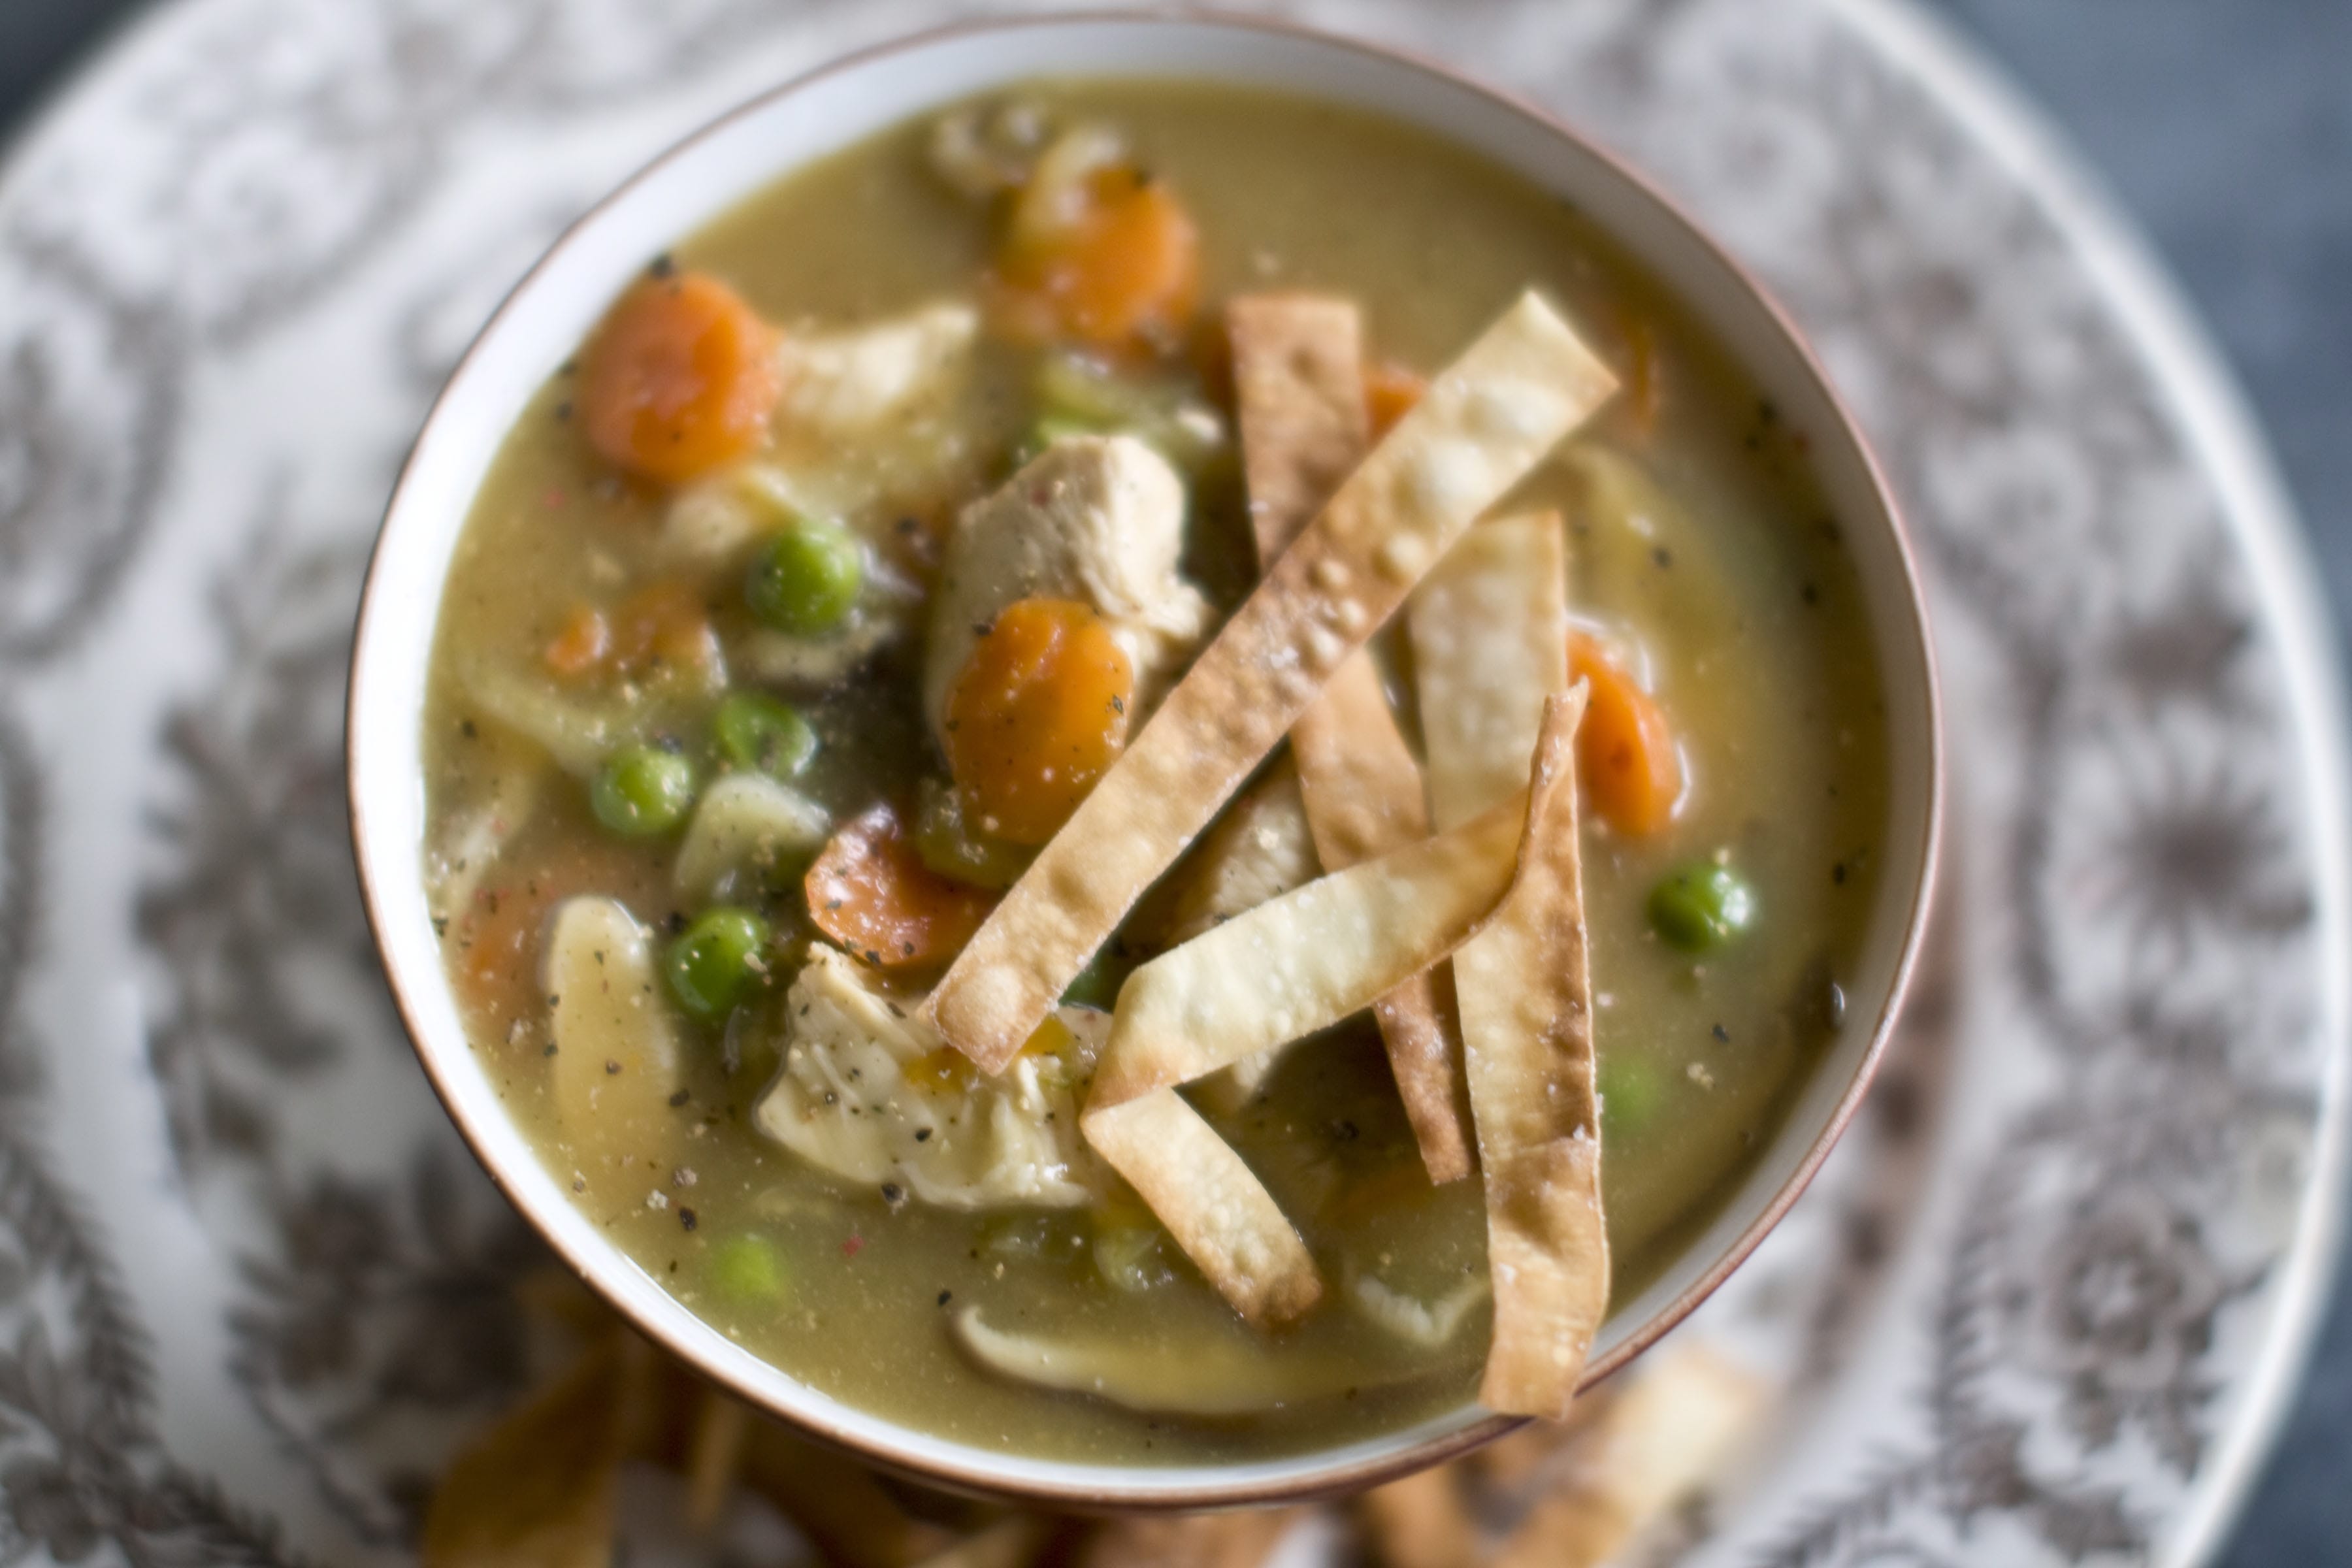 This recipe's fragrant broth is essentially a Chinese version of a Jewish chicken soup.